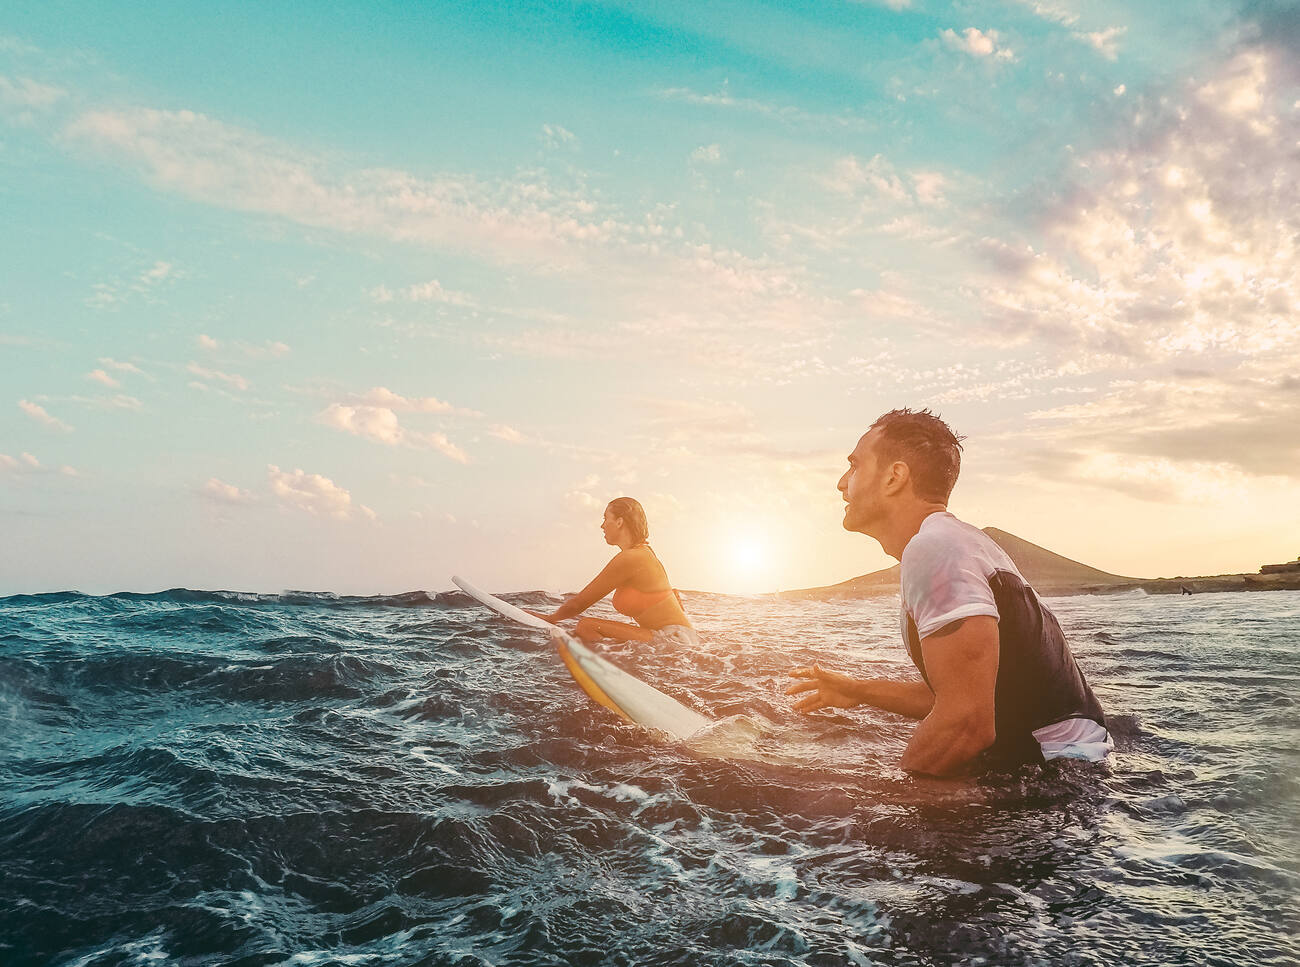 A male and female surfer riding out on their surfboards at sunrise.